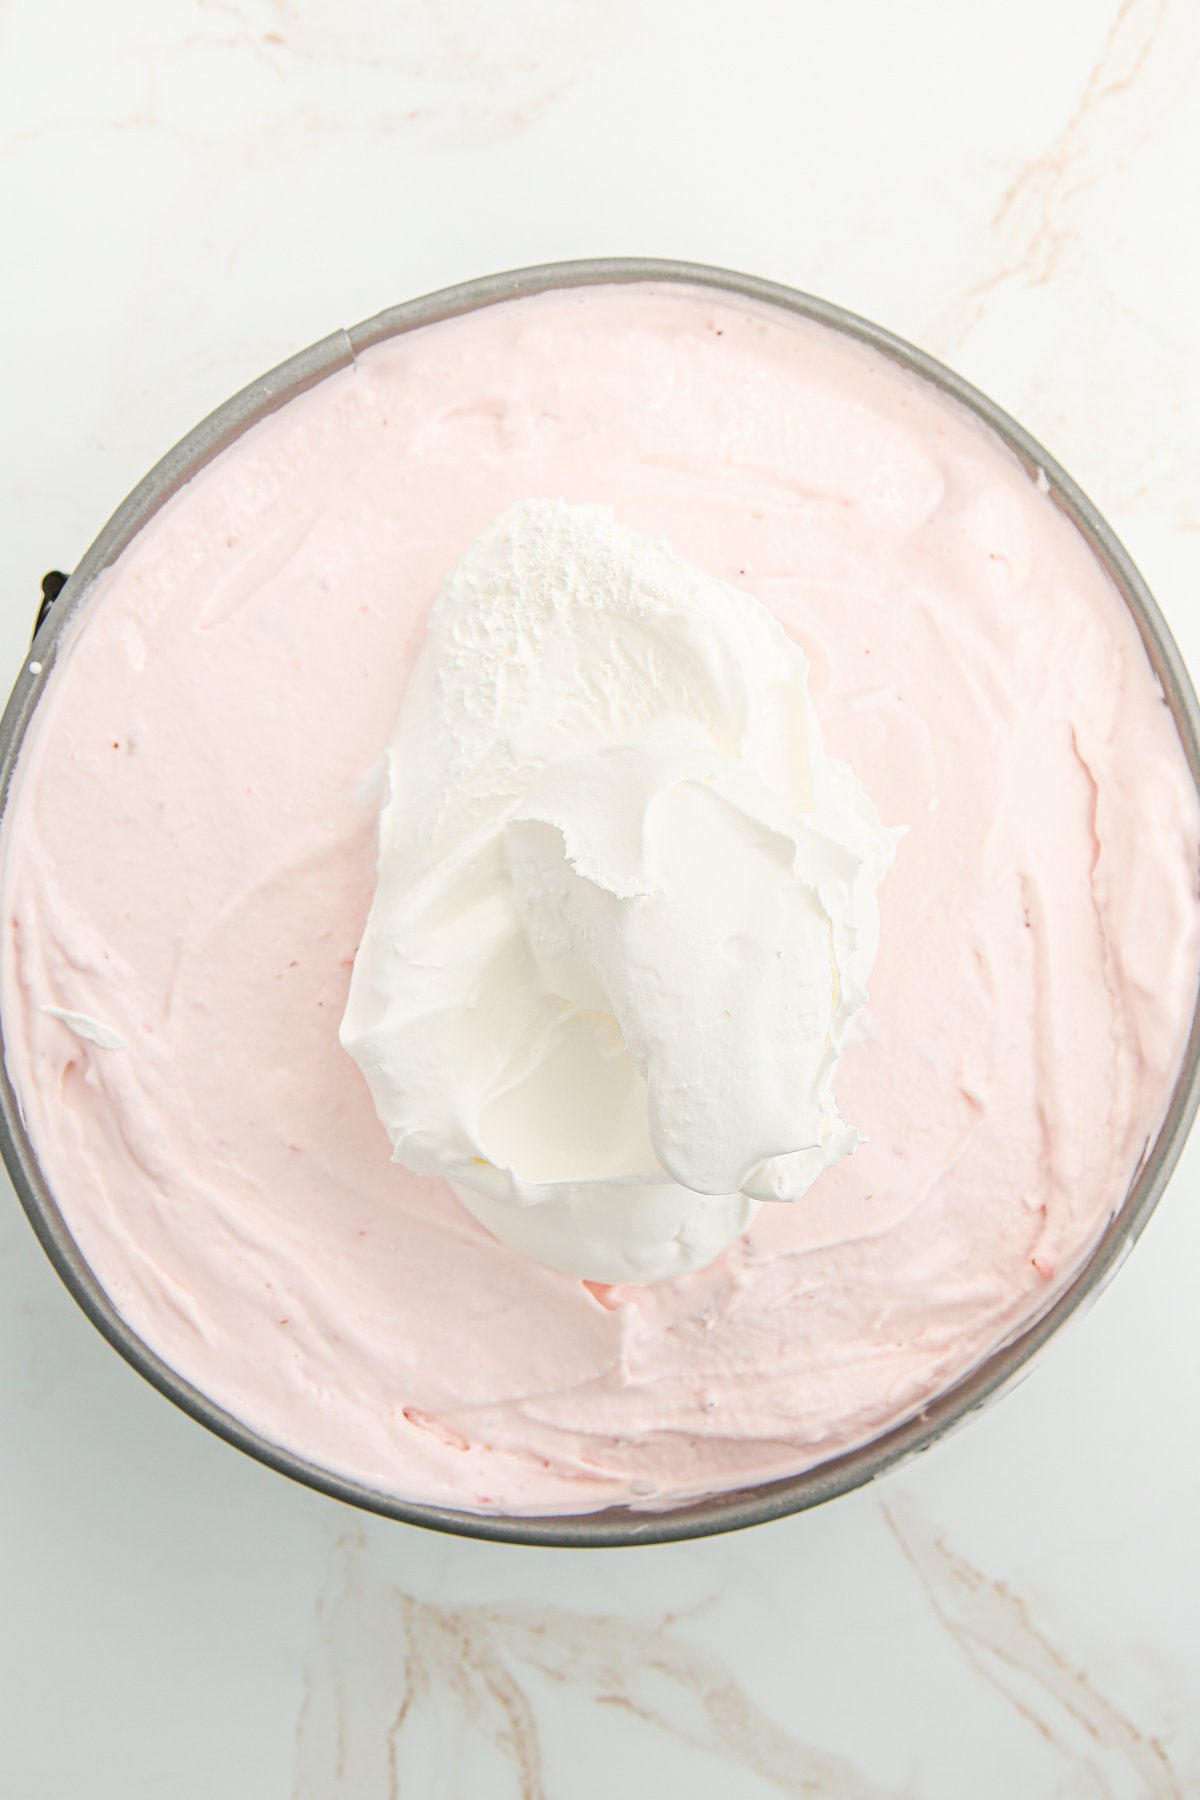 whipped cream on top of strawberry ice cream